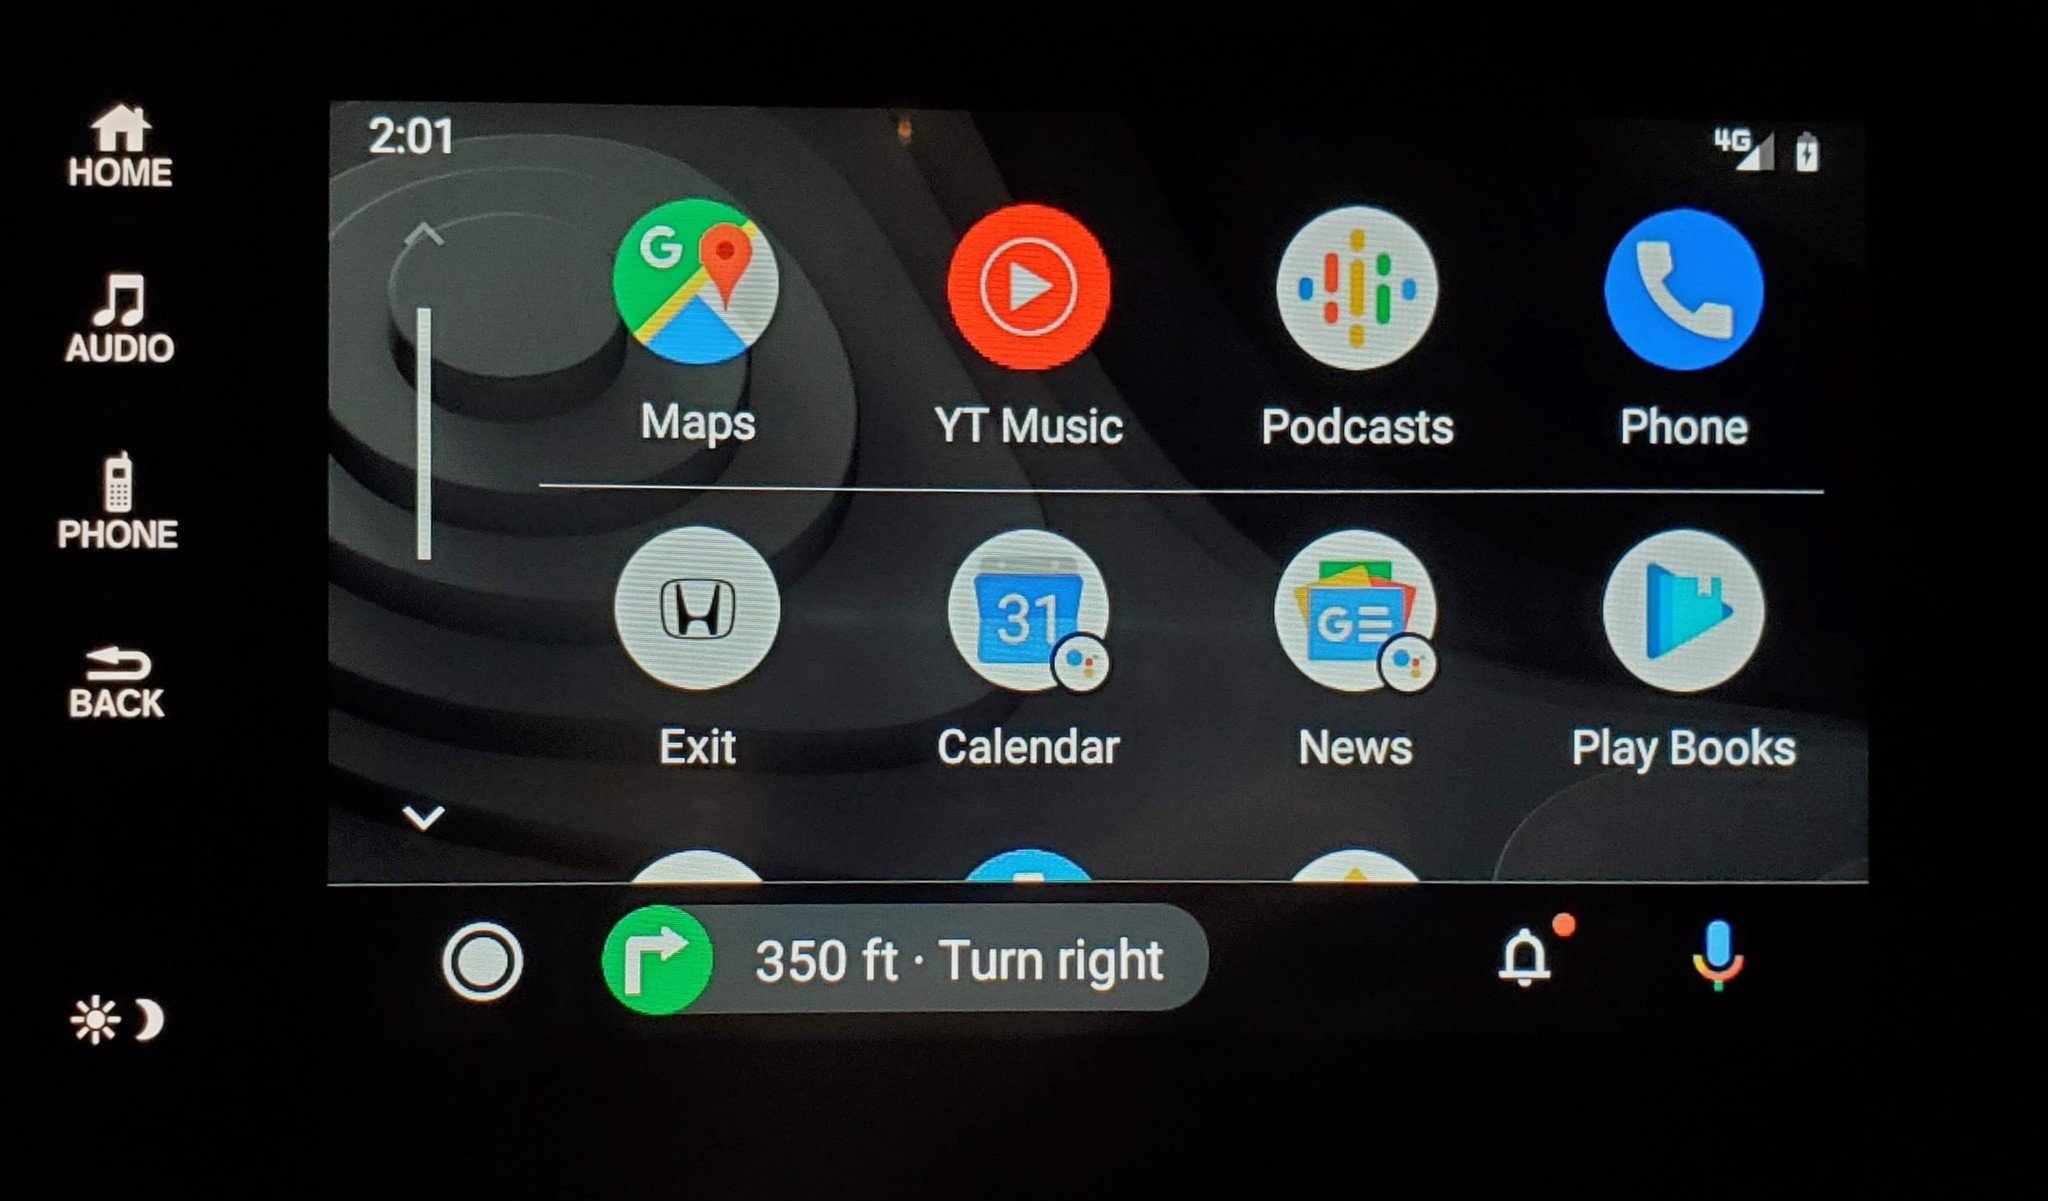 How to use Android Auto: Tips and tricks for your new car dash